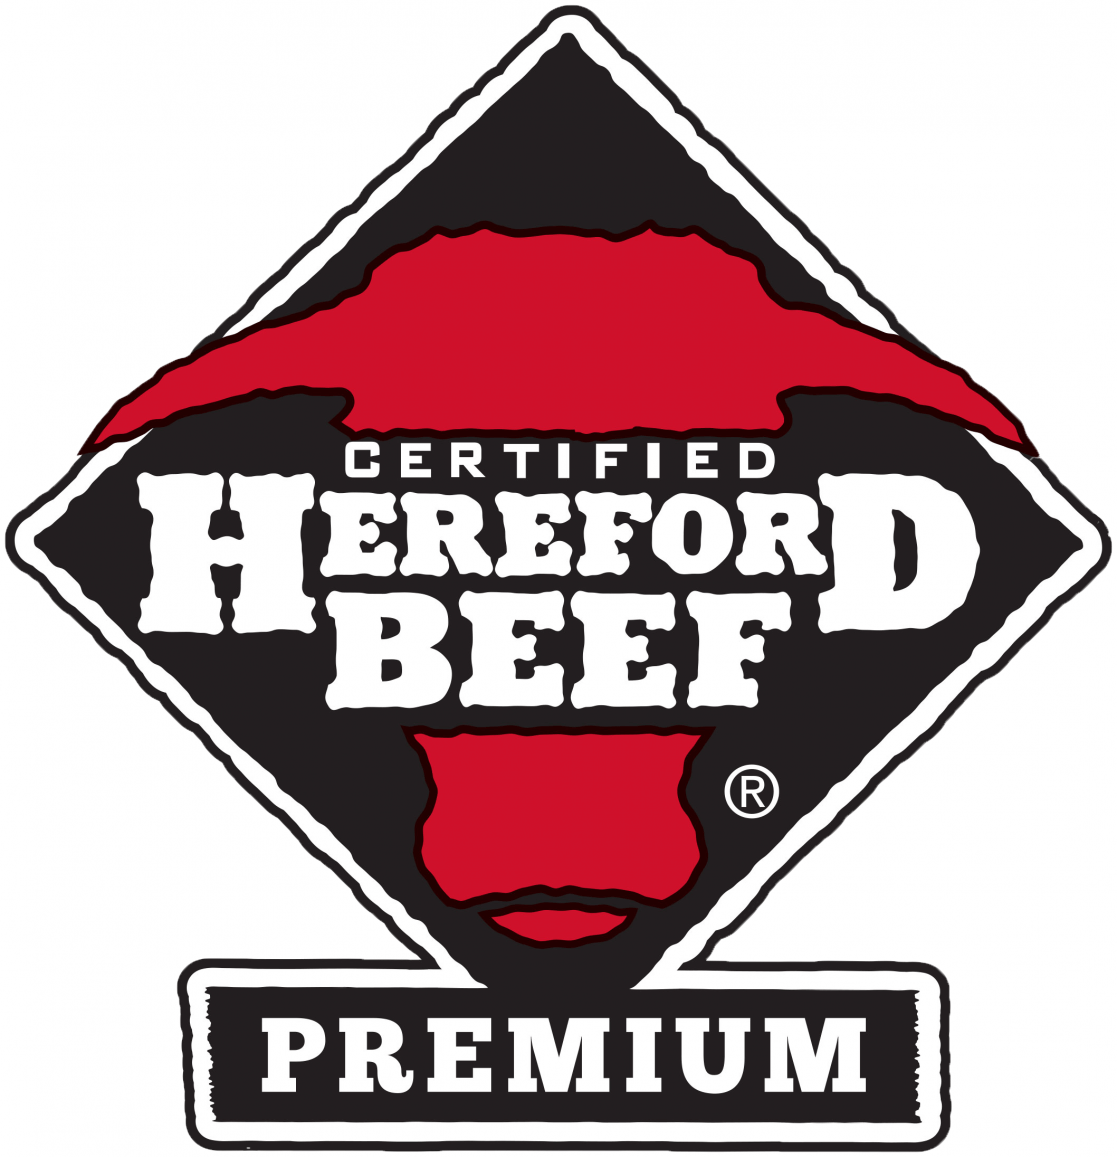 Certified Hereford Beef Launches Premium Program